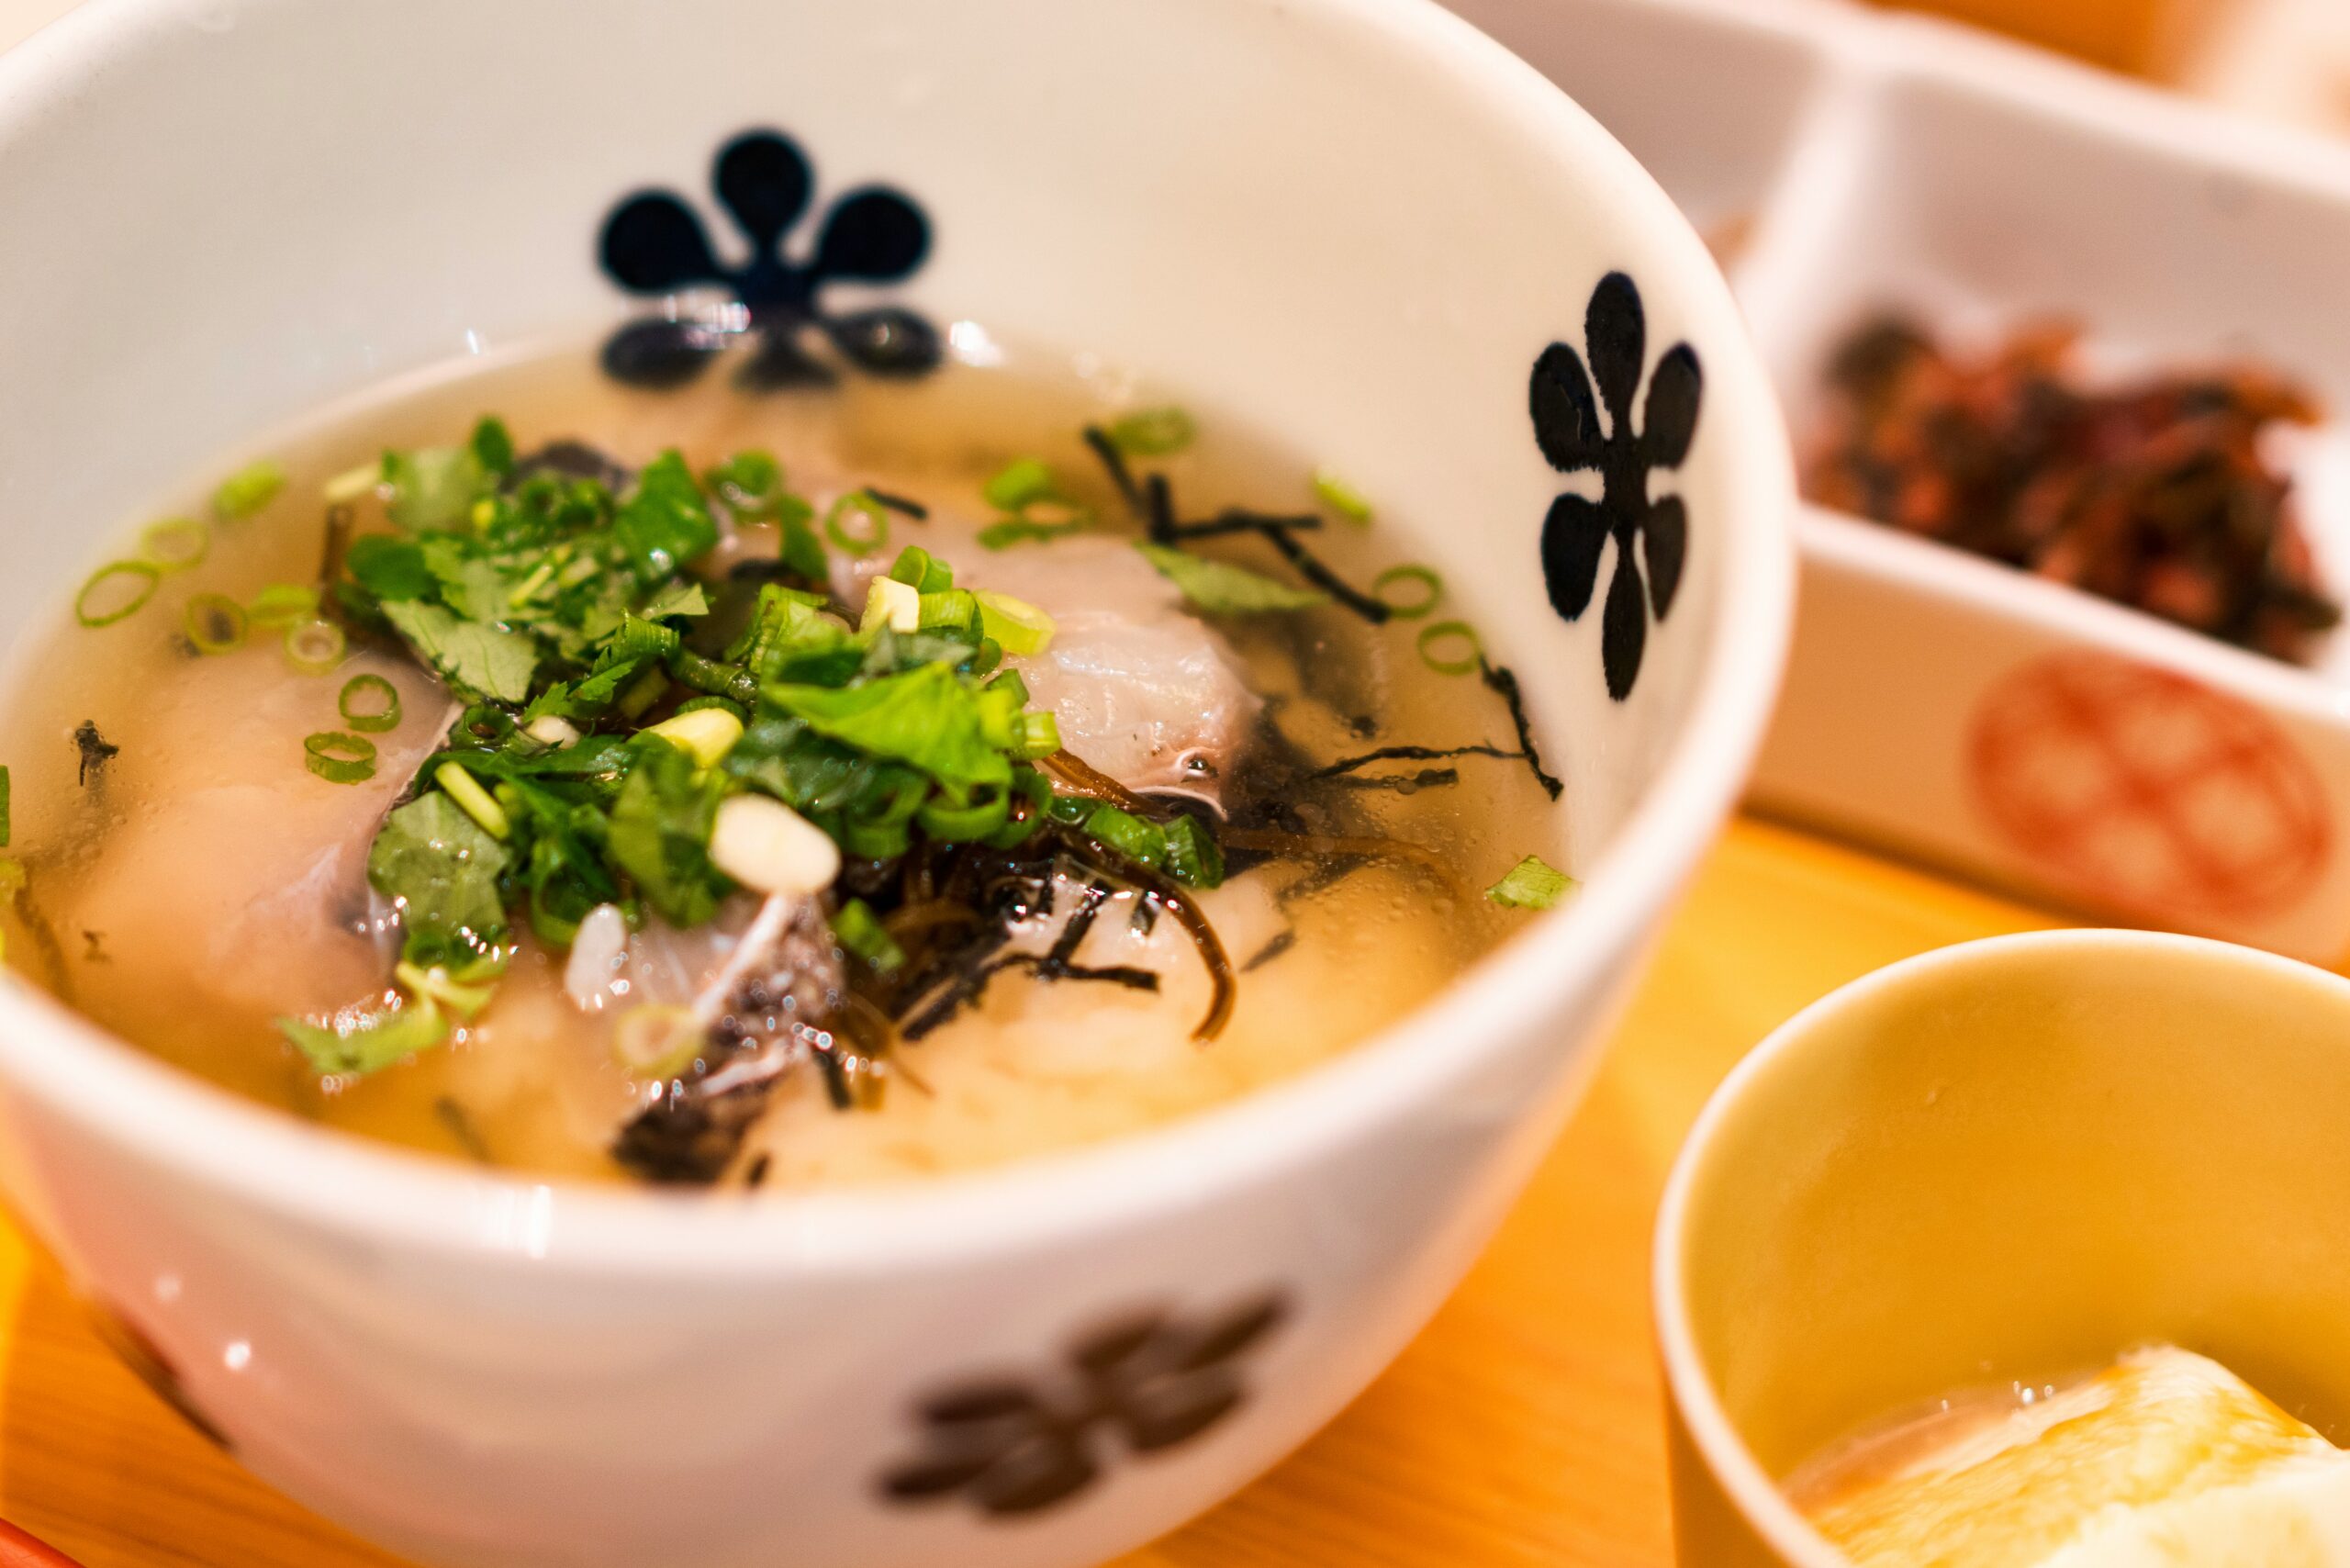 For soups, ramen, pastas and other recipes, miso paste works as an alternative for soy sauce. Pictured: miso soup